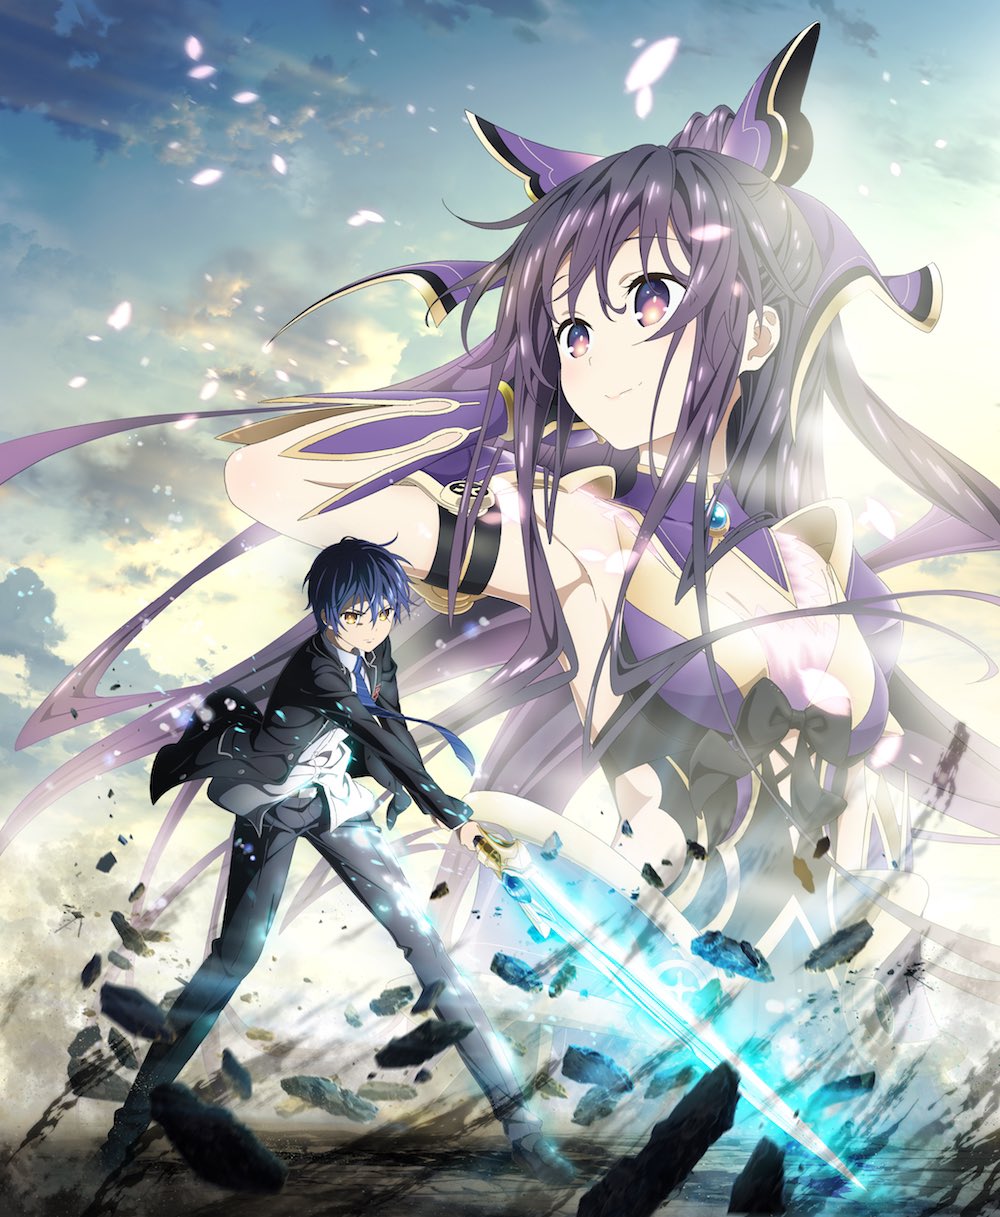 Date A Live Season 4 Set for October 2021 Premiere